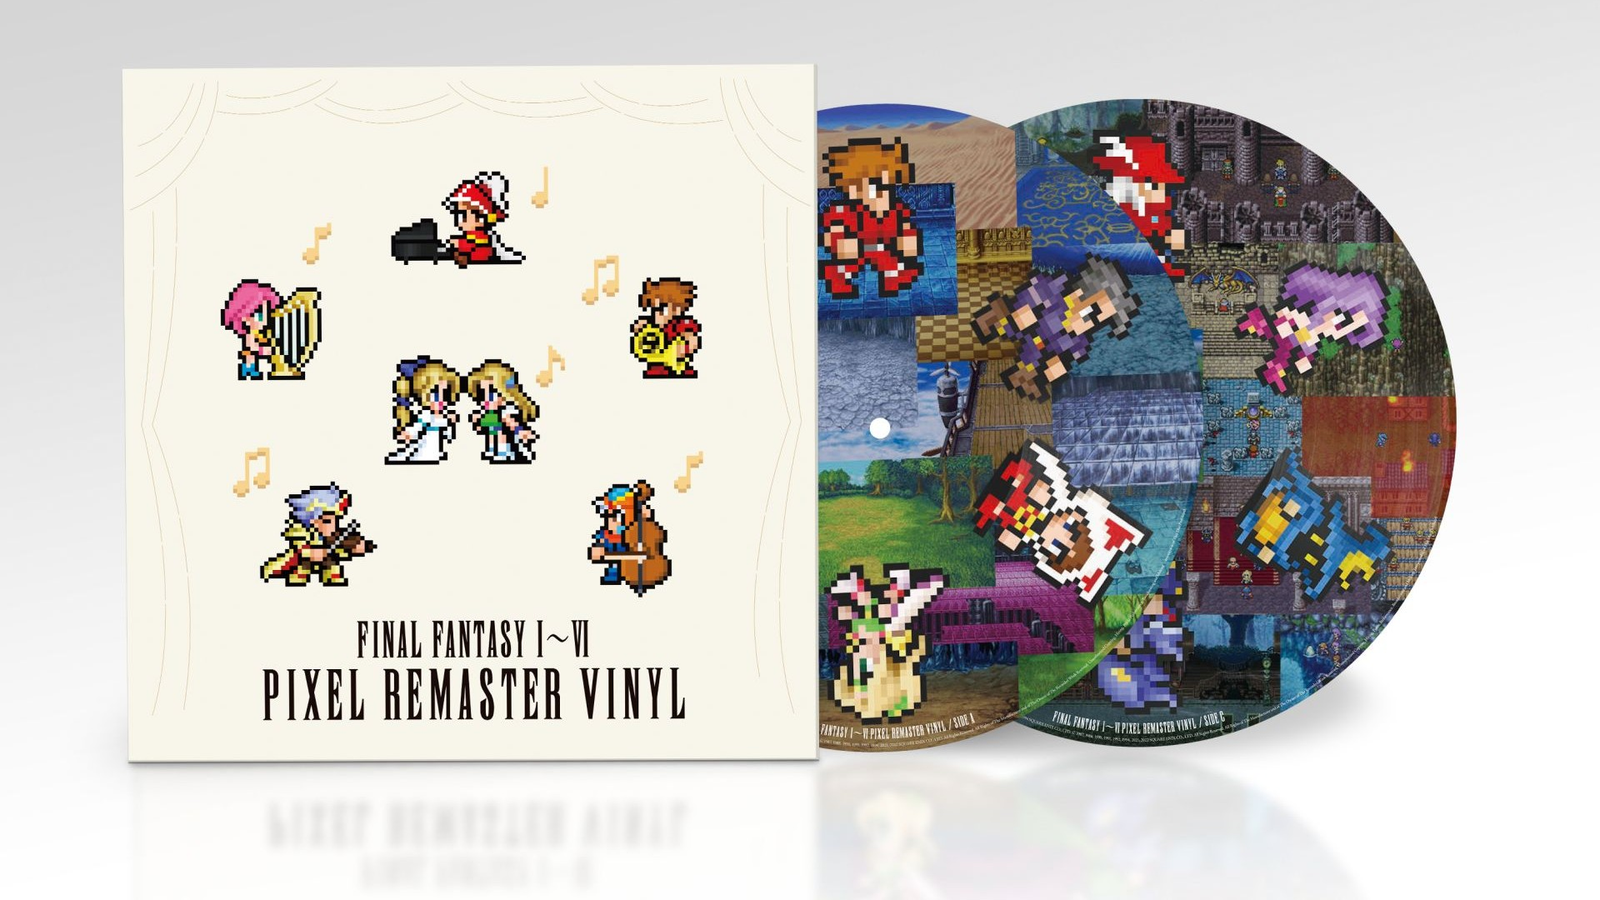 Final Fantasy 1-6 Pixel Remasters come to Nintendo Switch, PS4 in